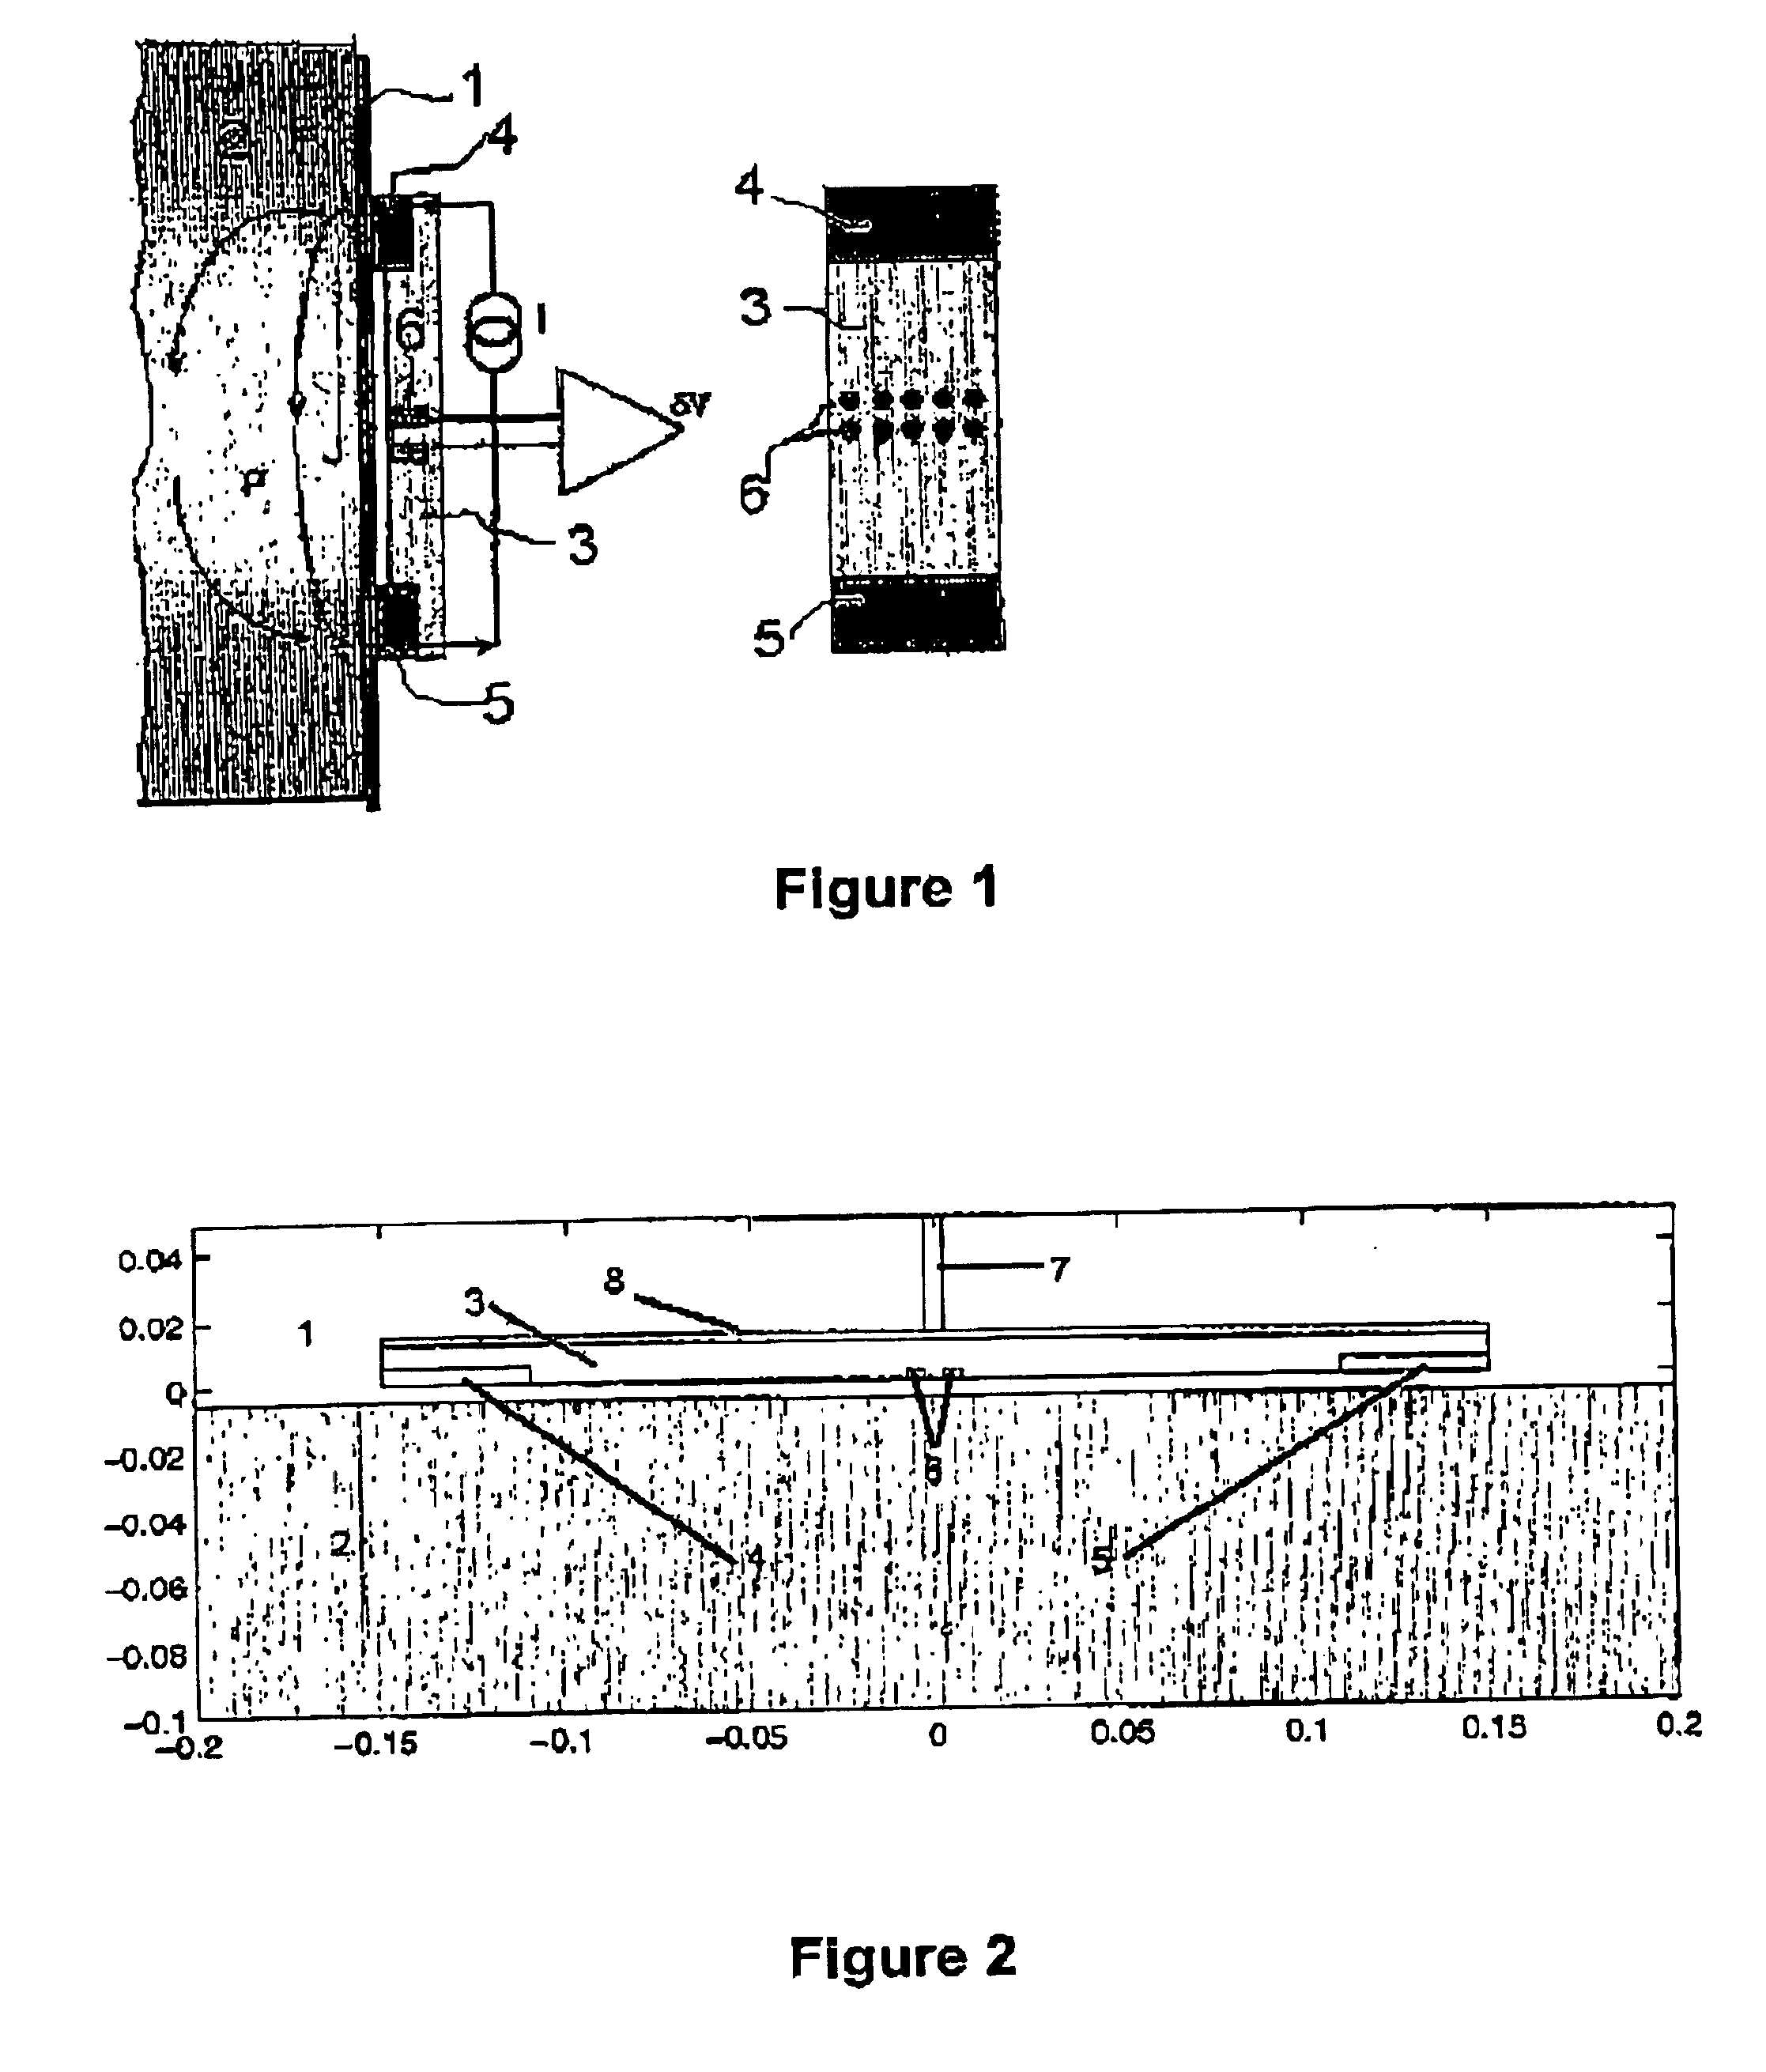 Conductive pad around electrodes for investigating the wall of a borehole in a geological formation